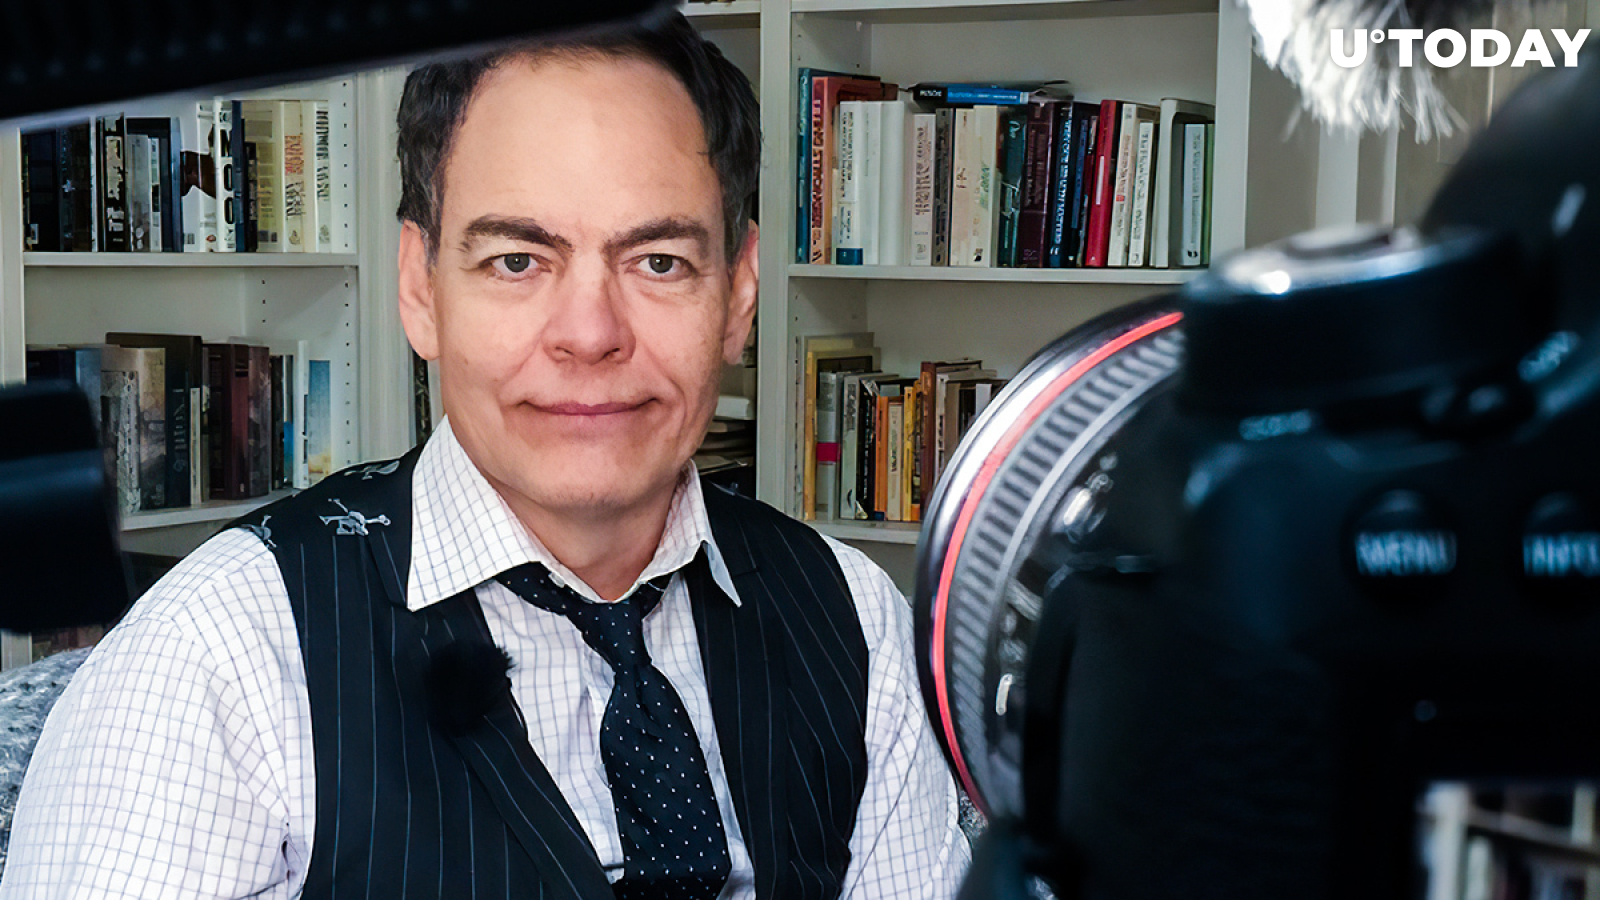 Max Keiser Says Bitcoin Could Have Saved Peter Schiff from Current Accusations of Tax Evasion